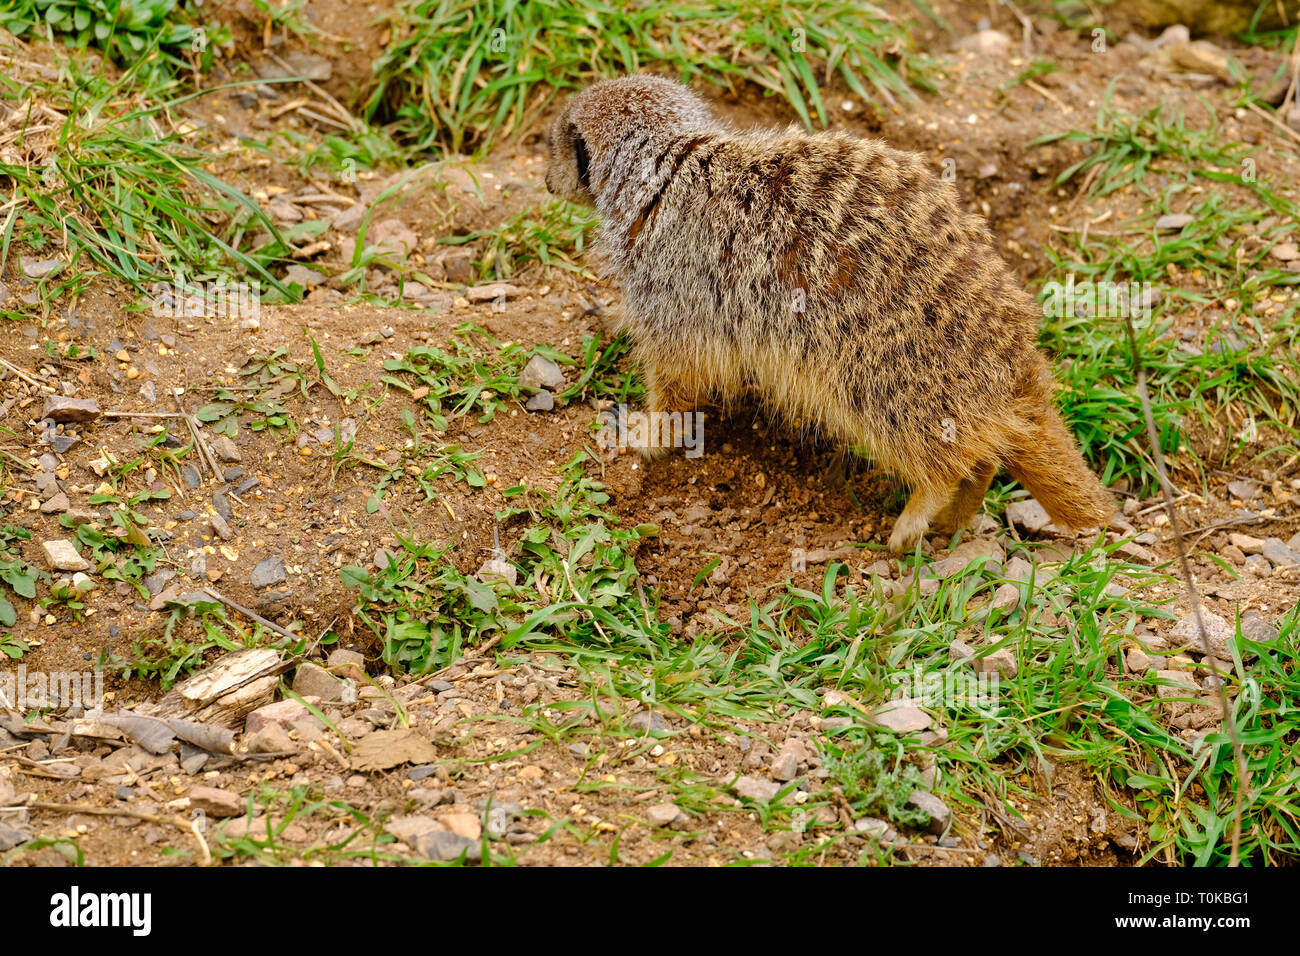 Adult male Slender-tailed Meerkat missing part of his tail after a leadership challenge and fight. Captive animal. Stock Photo